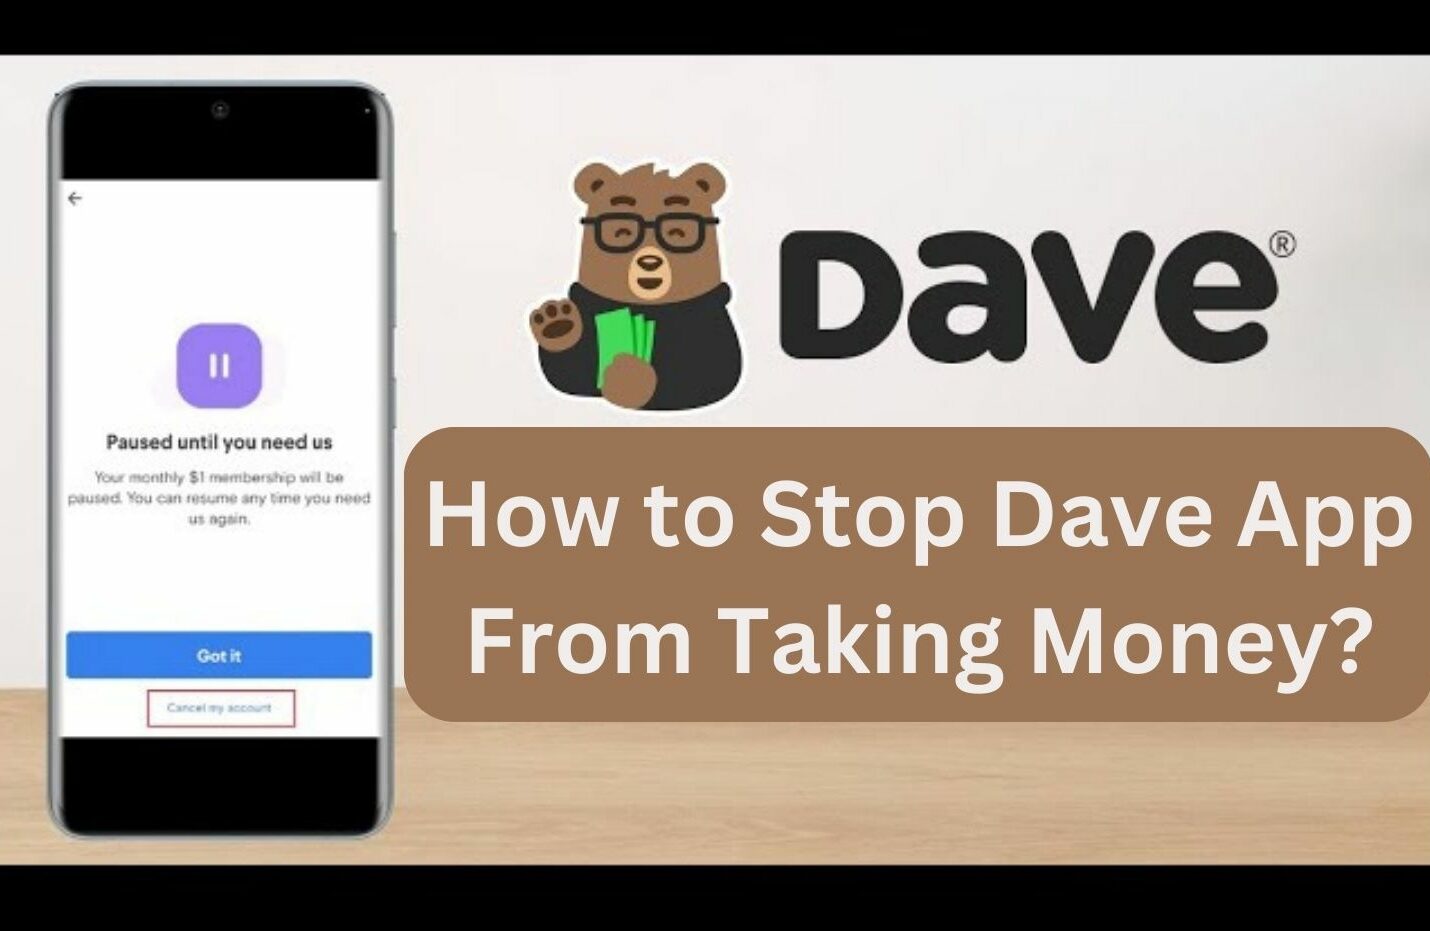 How to Stop Dave App From Taking Money?